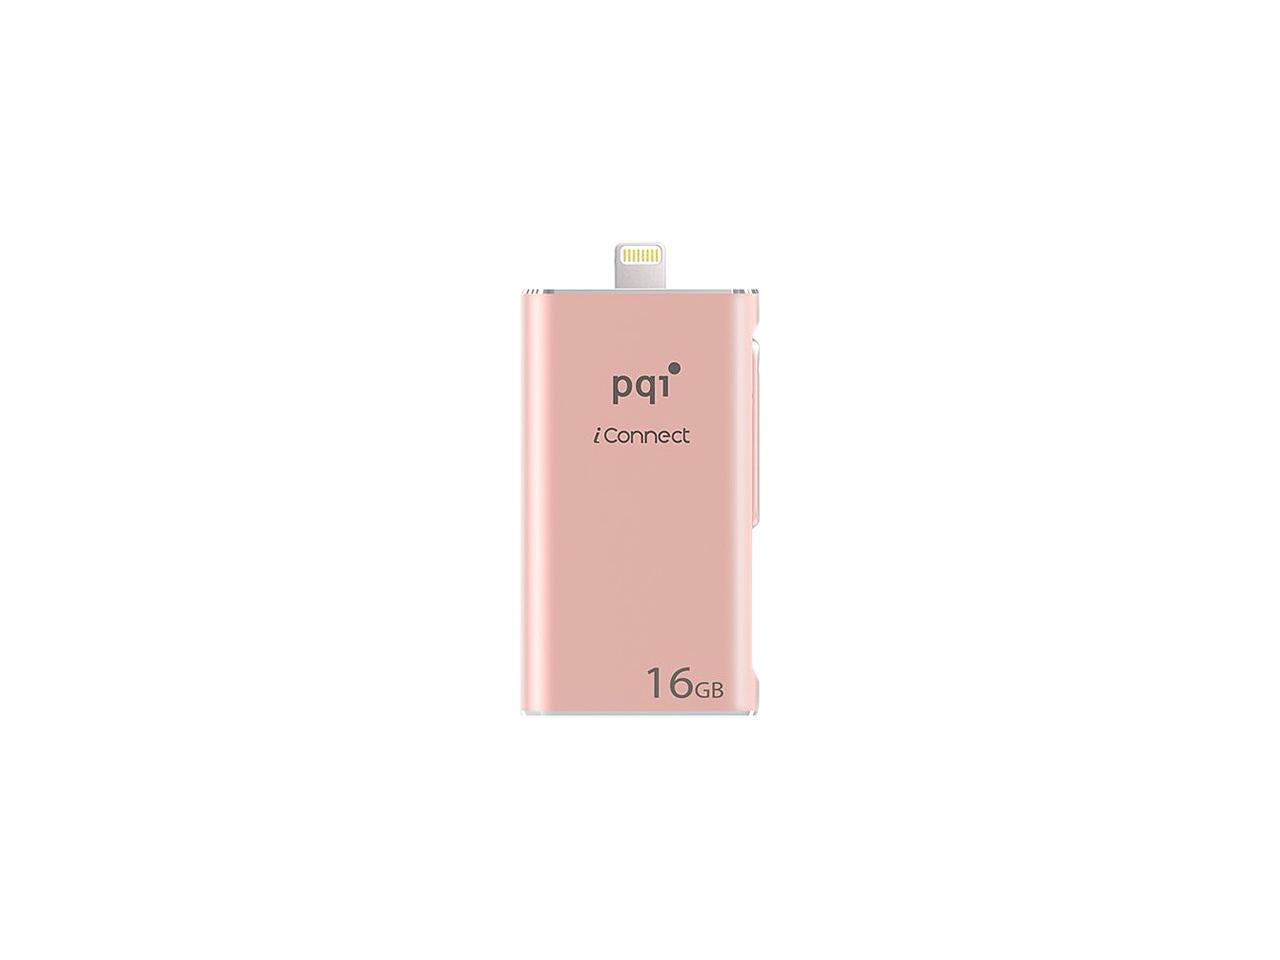 PQI iConnect [Apple MFi] 16GB Mobile Flash Drive w/ Lightning Connector for iPhones / iPads / iPod / Mac & PC USB 3.0 (Rose Gold) Model 6I01-016GR4001